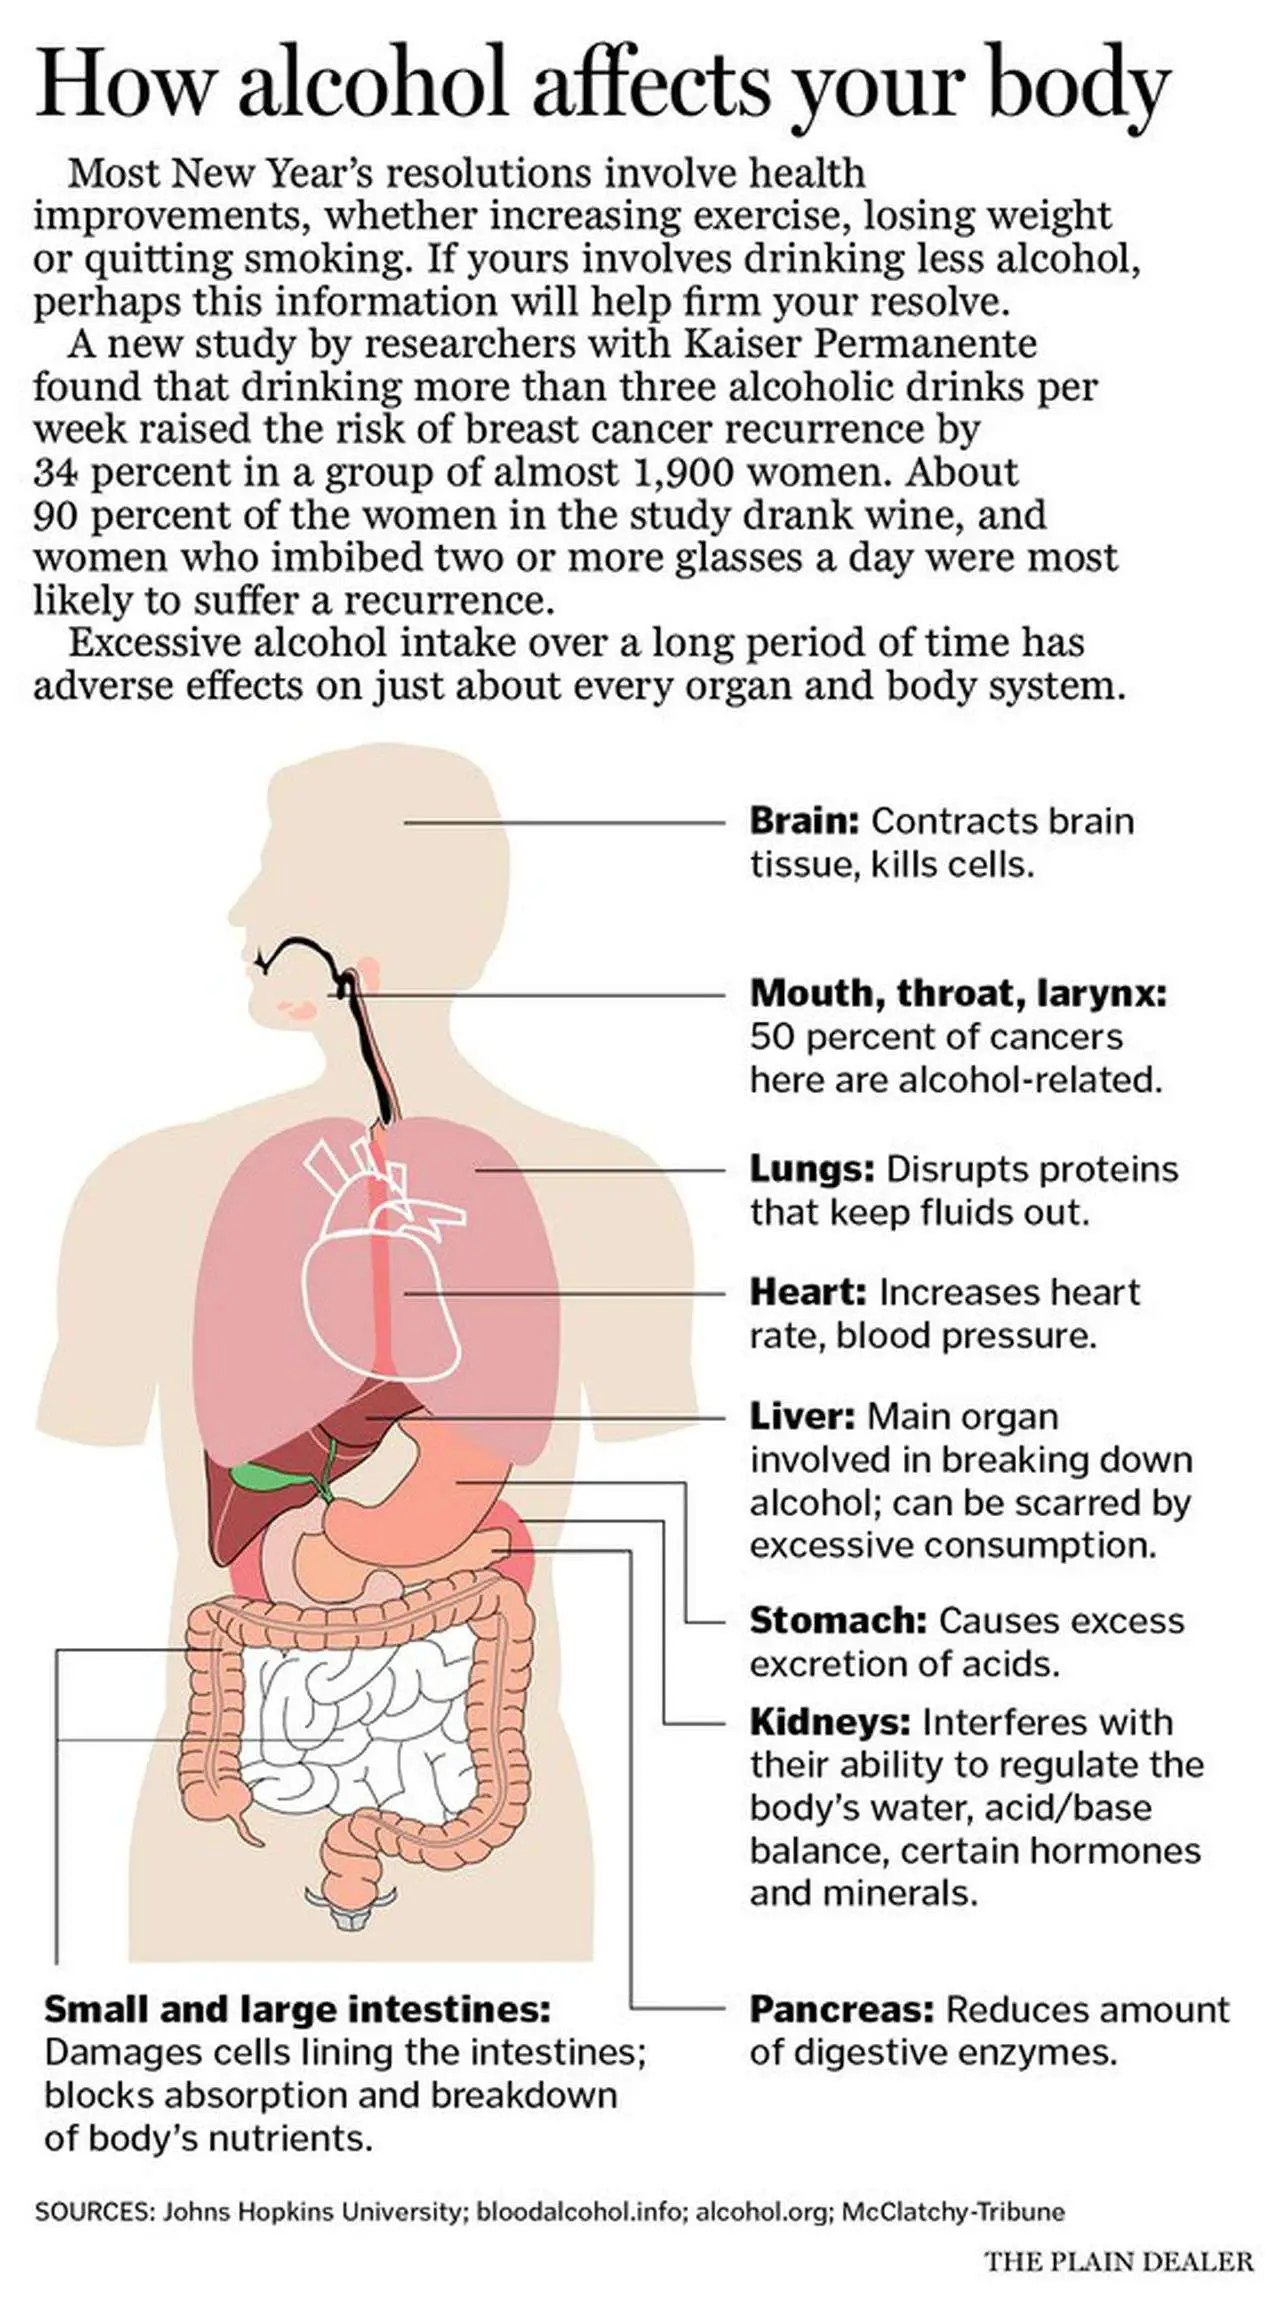 How alcohol affects your body